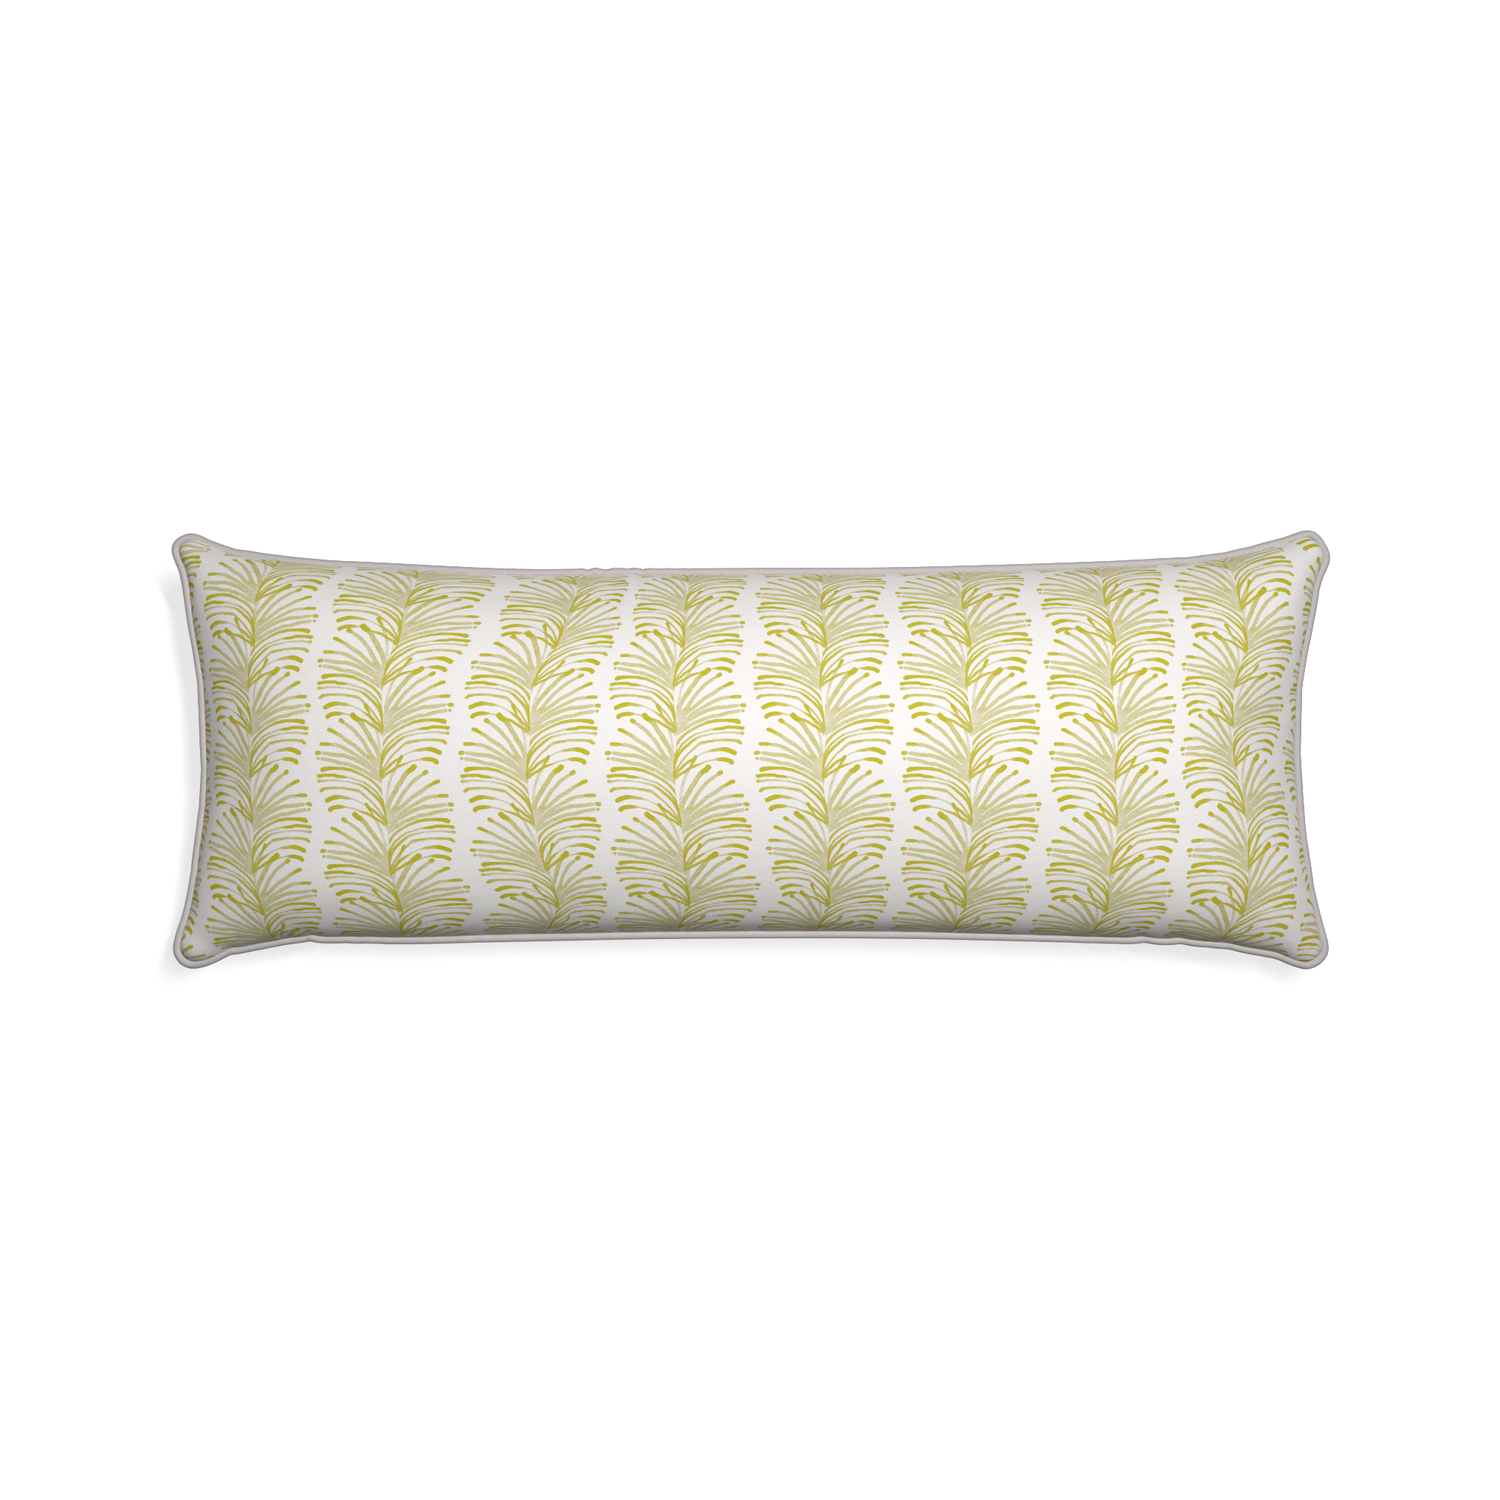 Xl-lumbar emma chartreuse custom pillow with pebble piping on white background